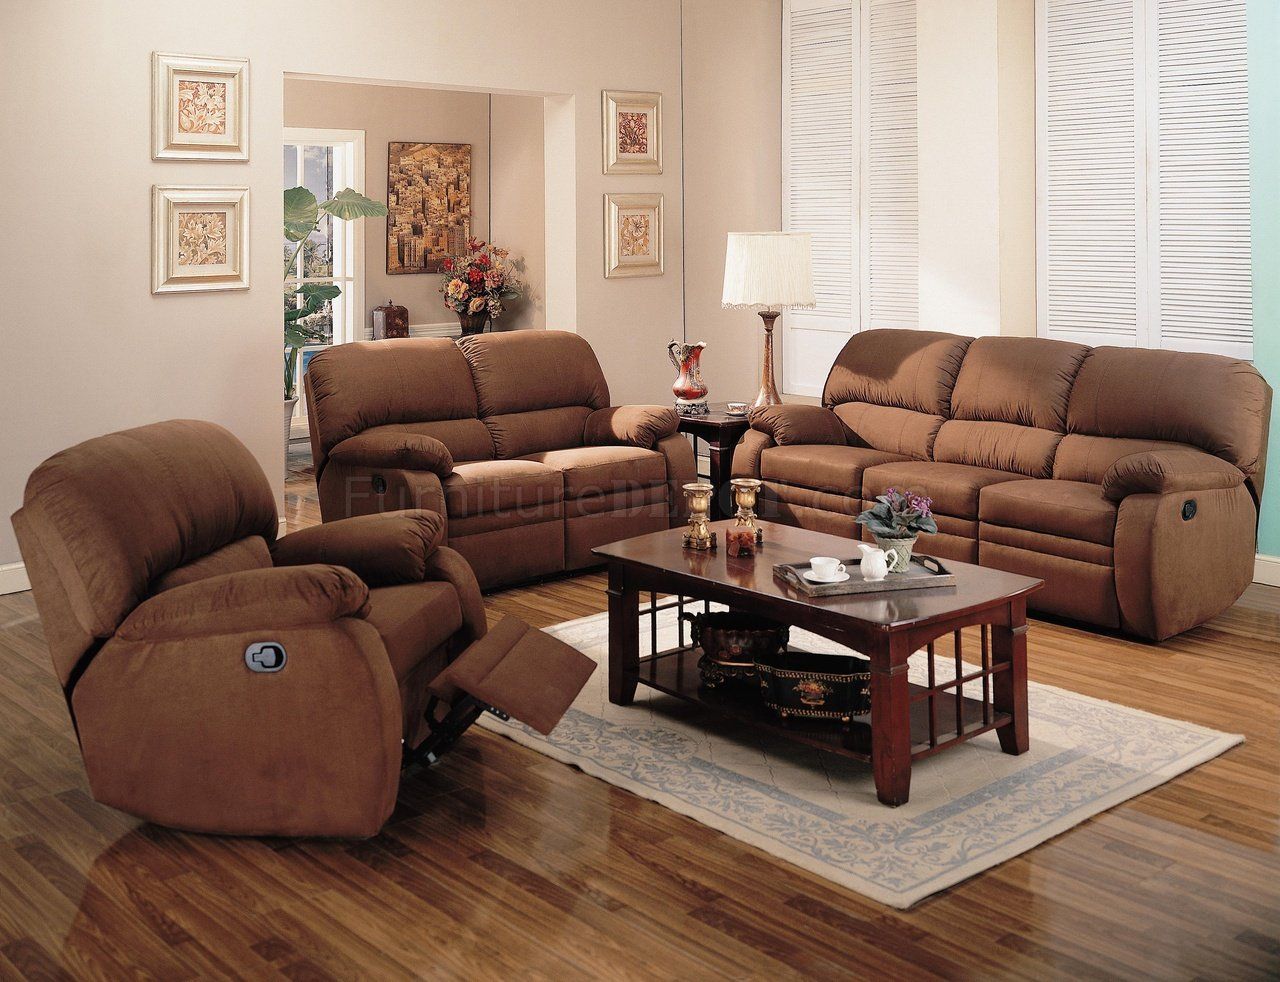 Soft Chocolate Microfiber Reclining Living Room Sofa W/options With 2 Tone Chocolate Microfiber Sofas (View 8 of 20)